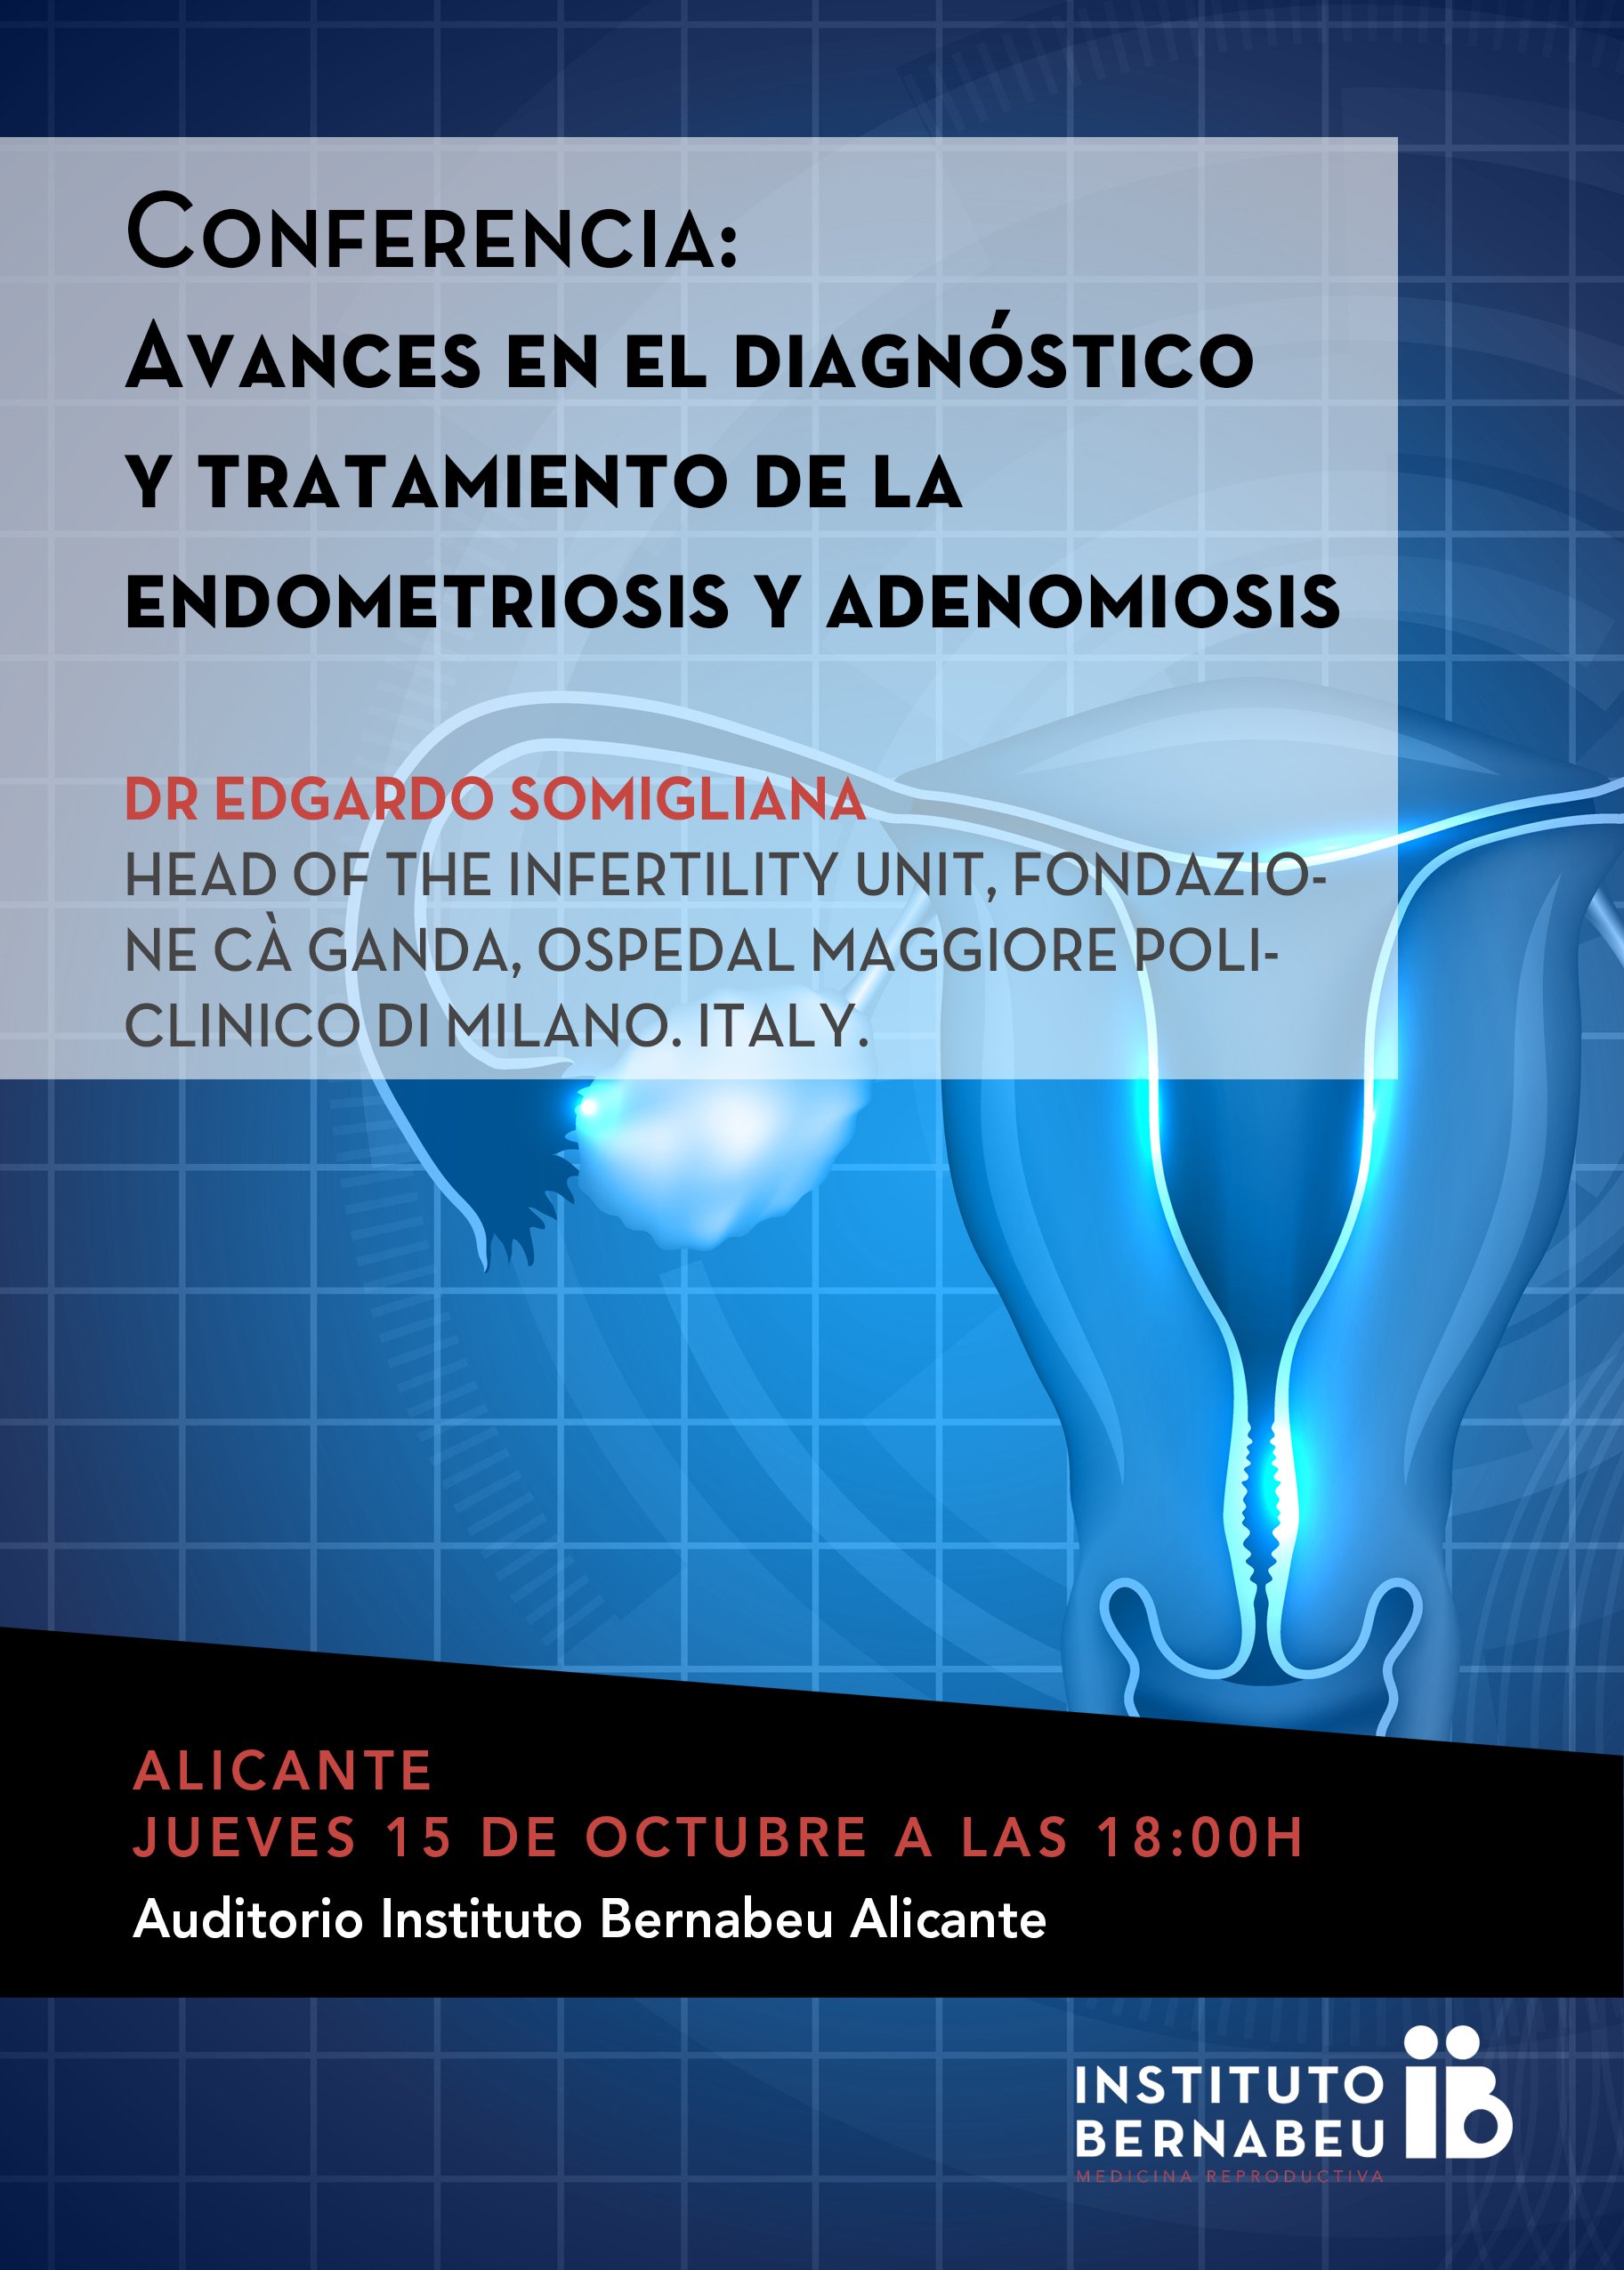 Advances in the diagnosis and treatment of endometriosis and adenomyosis